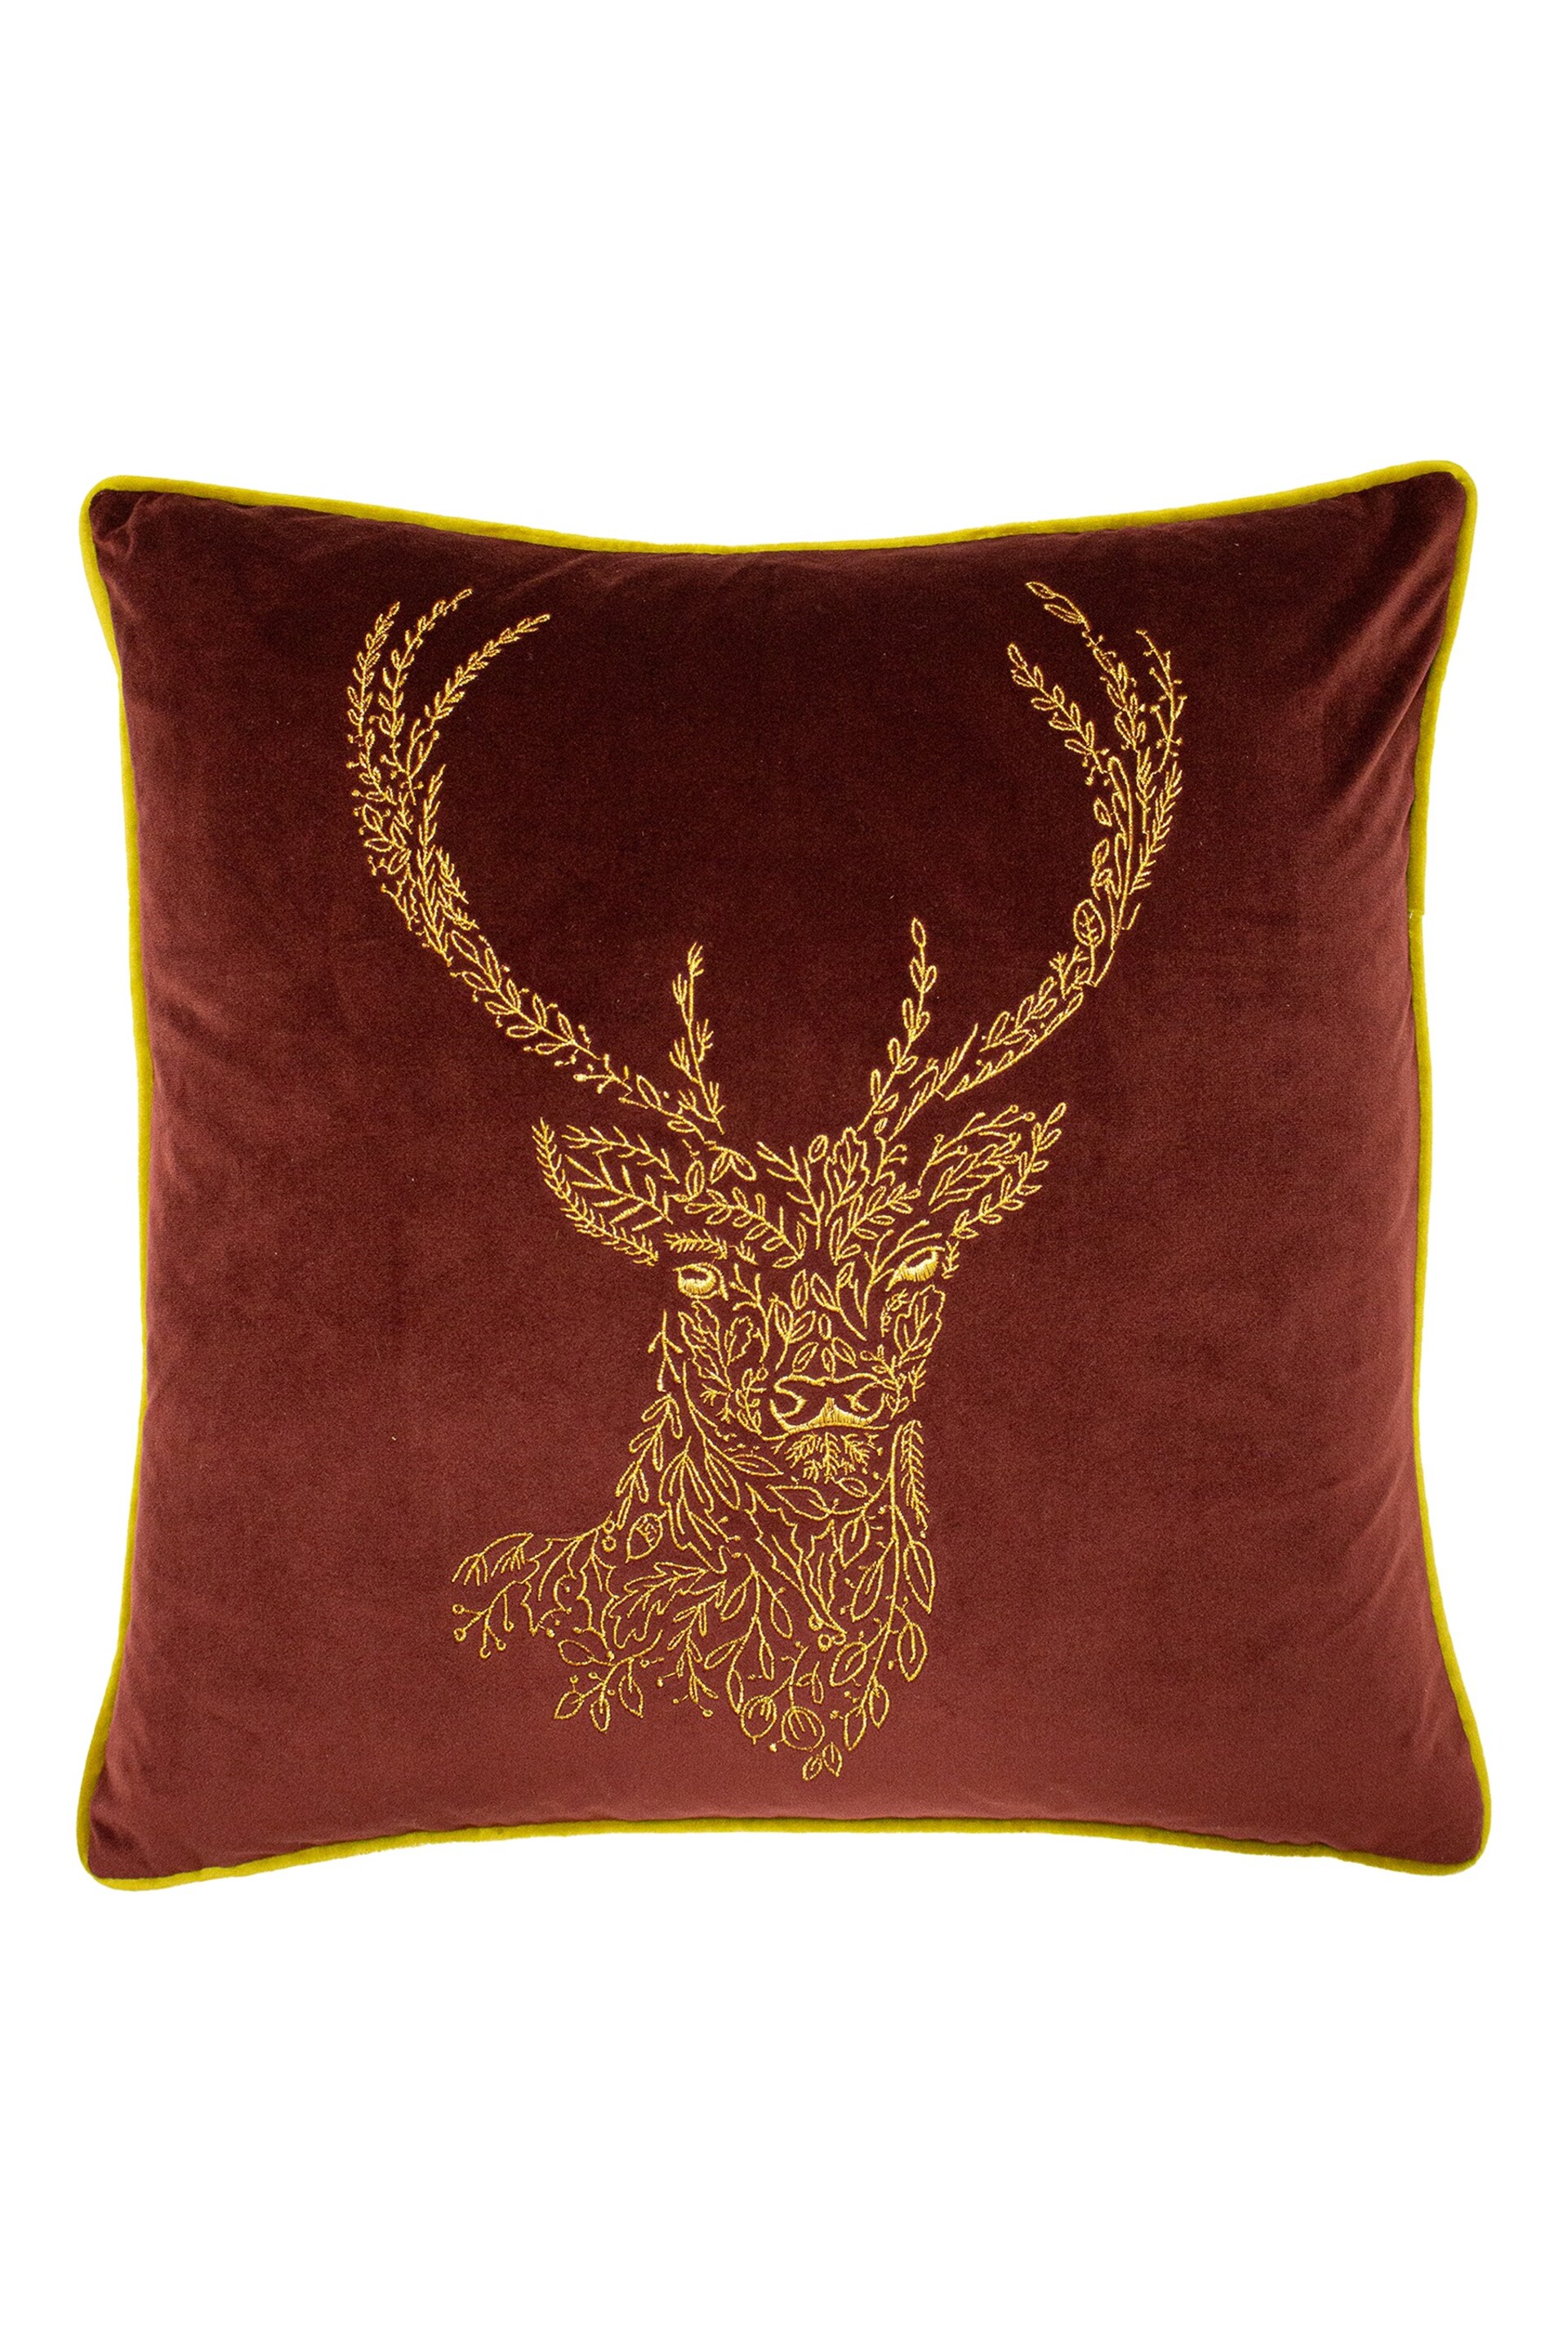 furn. Burgundy Red/Gold Forest Fauna Embroidered Polyester Filled Cushion - Image 2 of 5